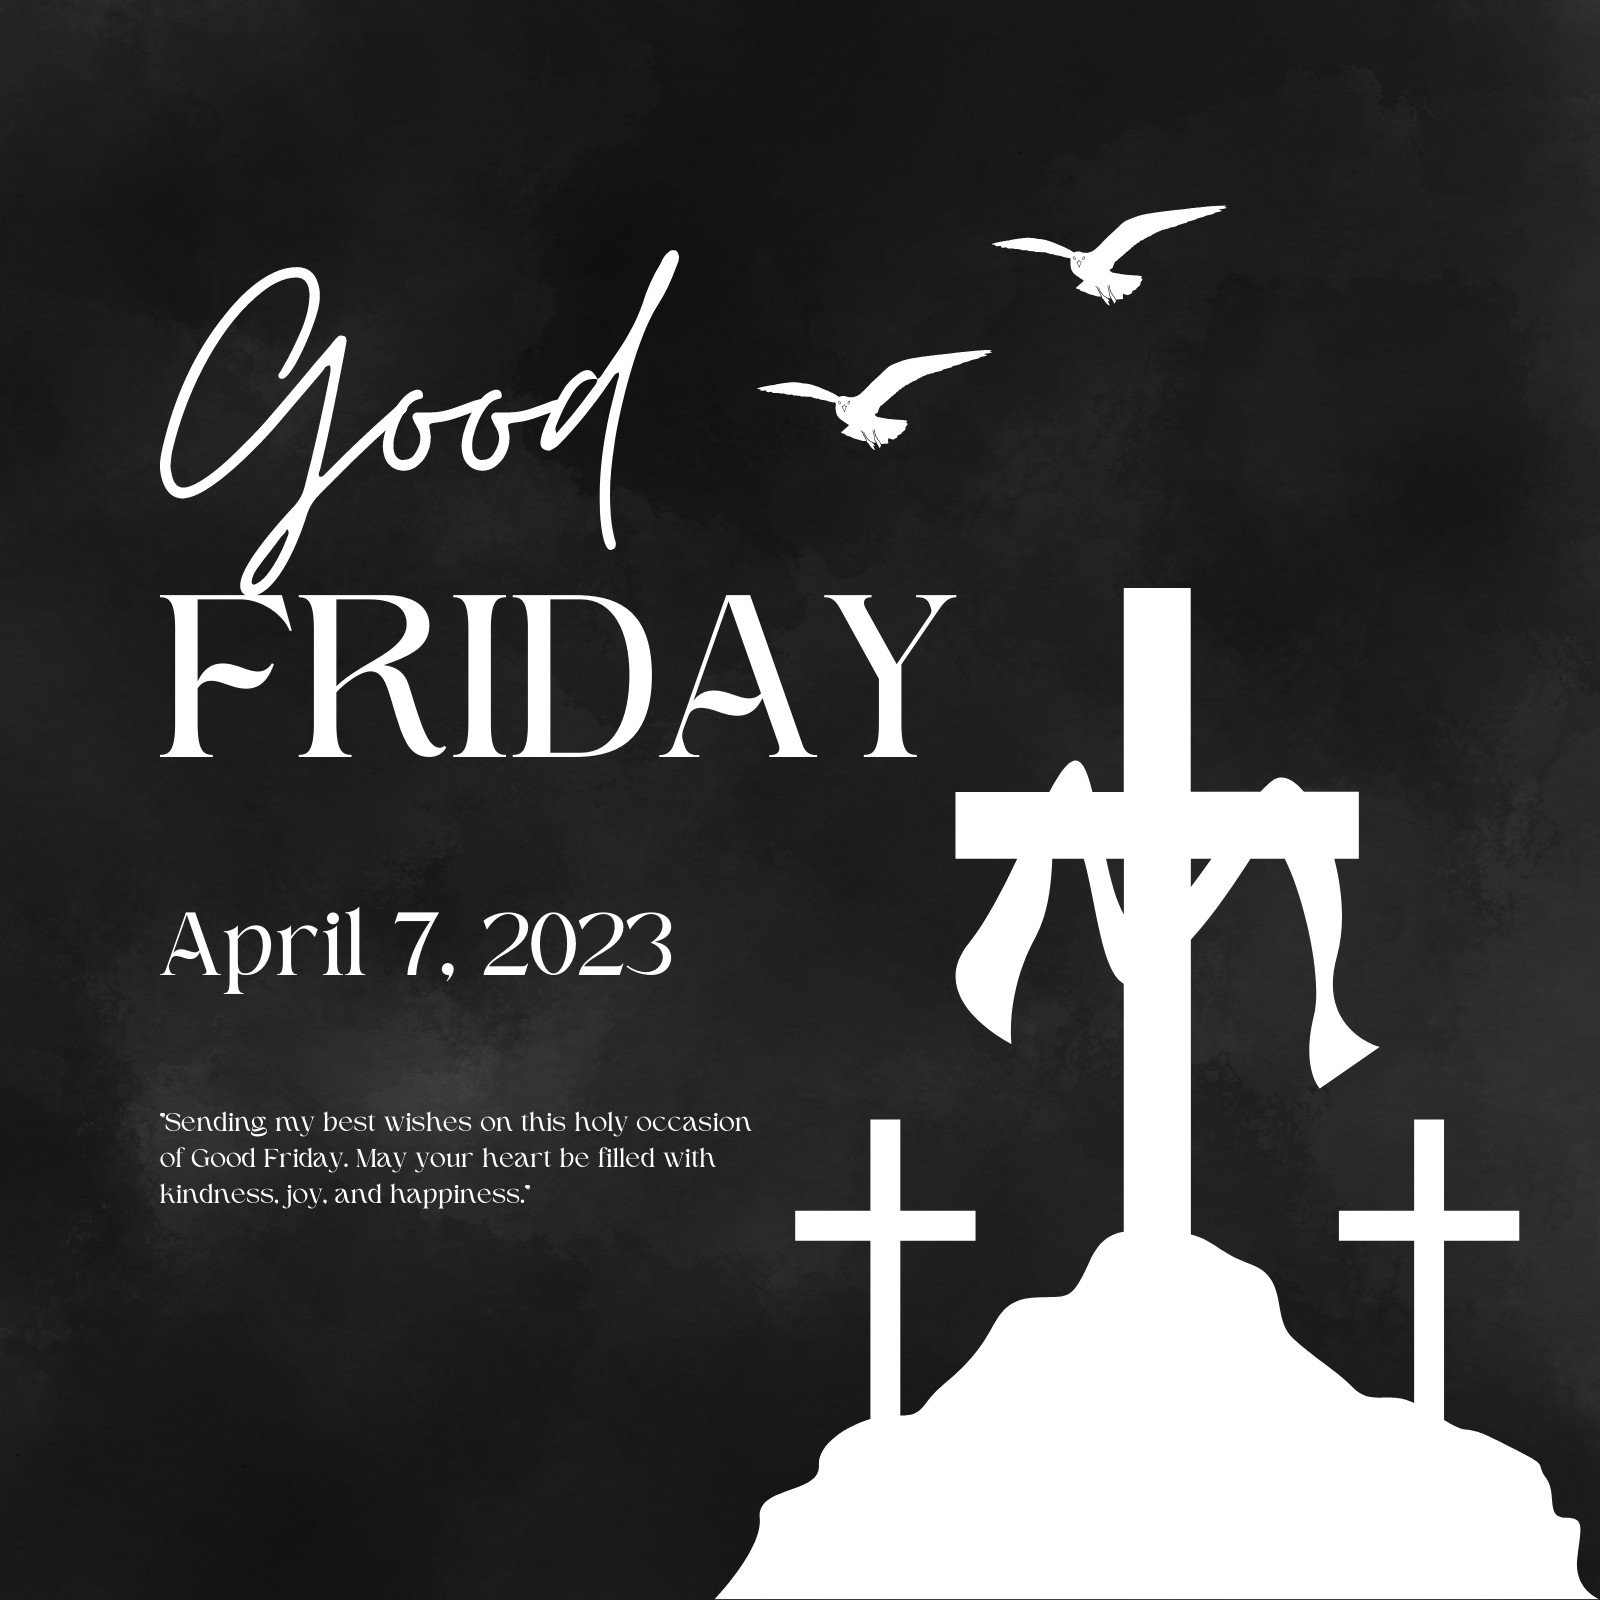 good friday images black and white